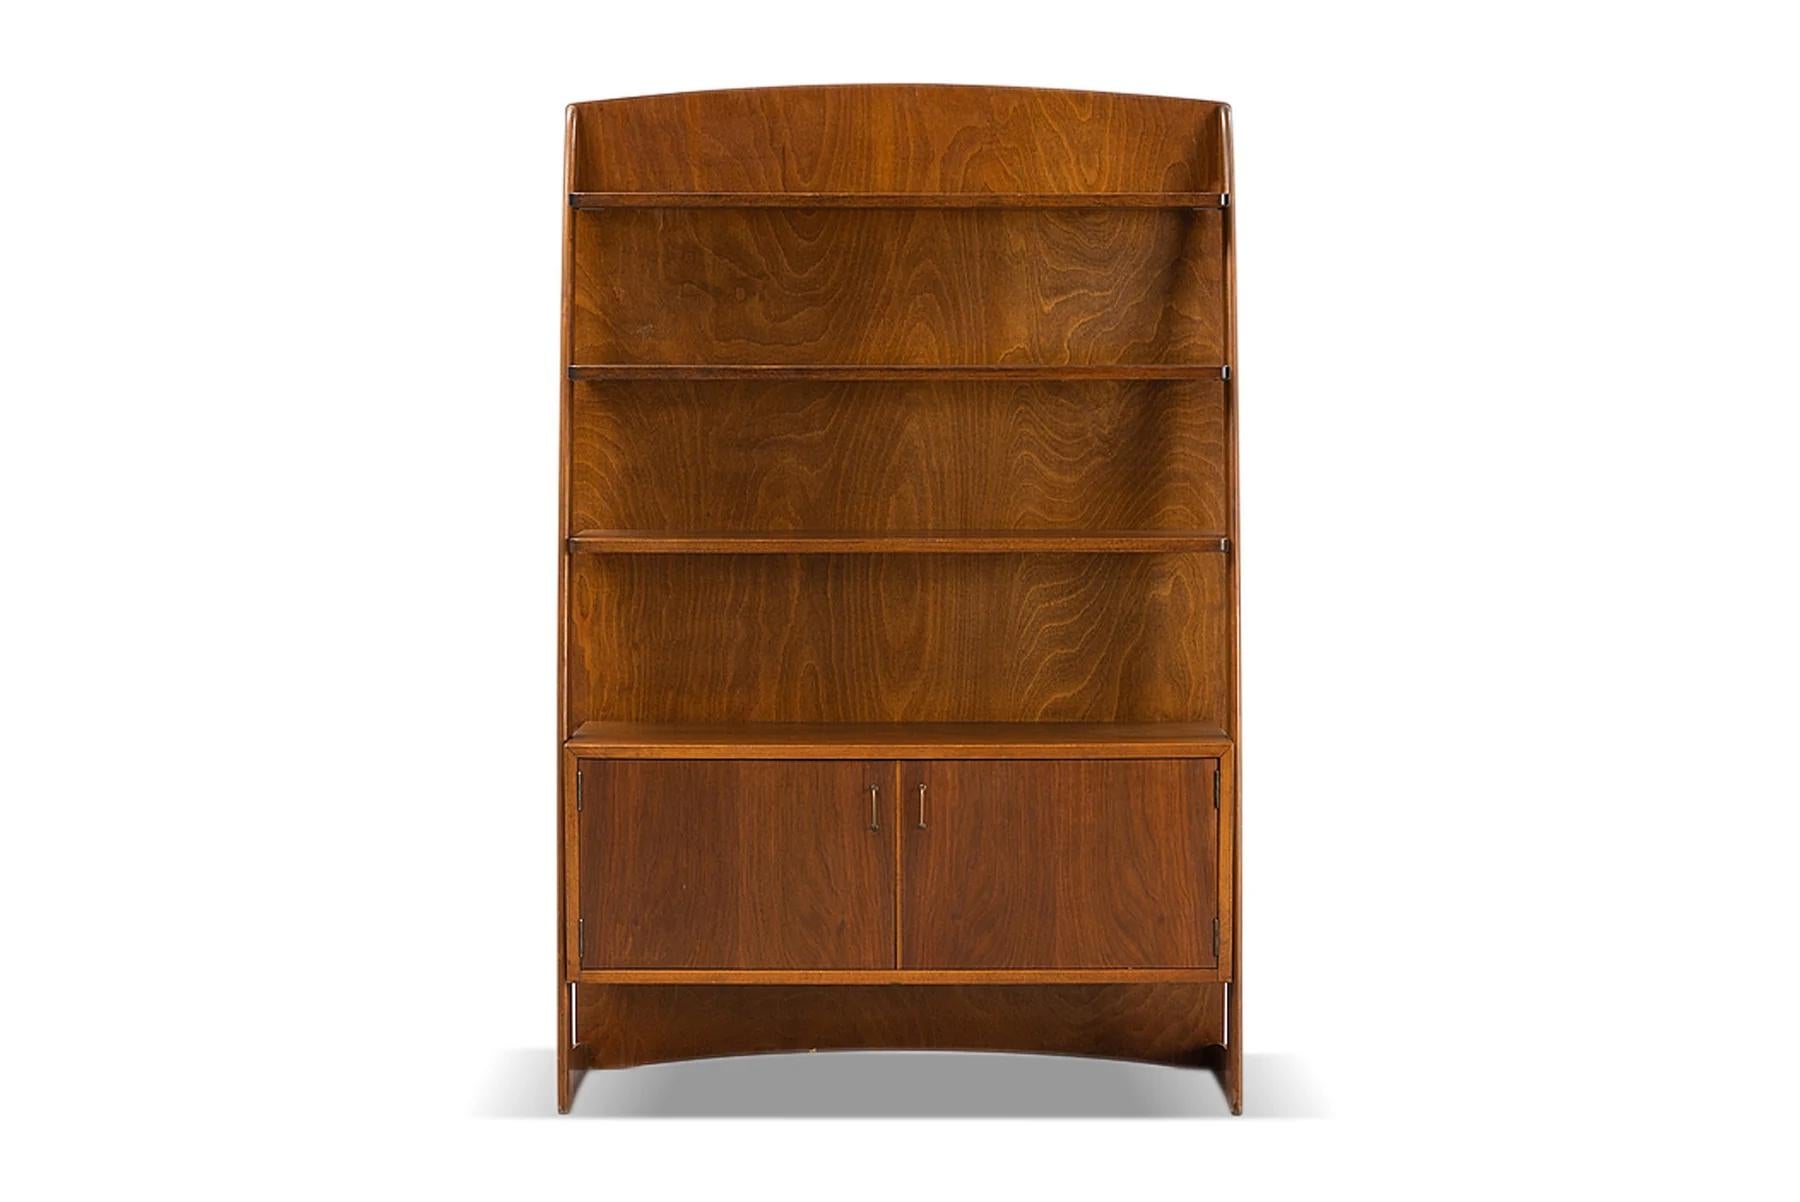 Origin: Sweden
Designer: Unknown
Manufacturer: Unknown
Era: 1950s
Materials: Beech
Measurements: 39.5″ wide x 12.5″ deep x 59.5″ tall

Condition: In excellent original condition with typical wear for its vintage.